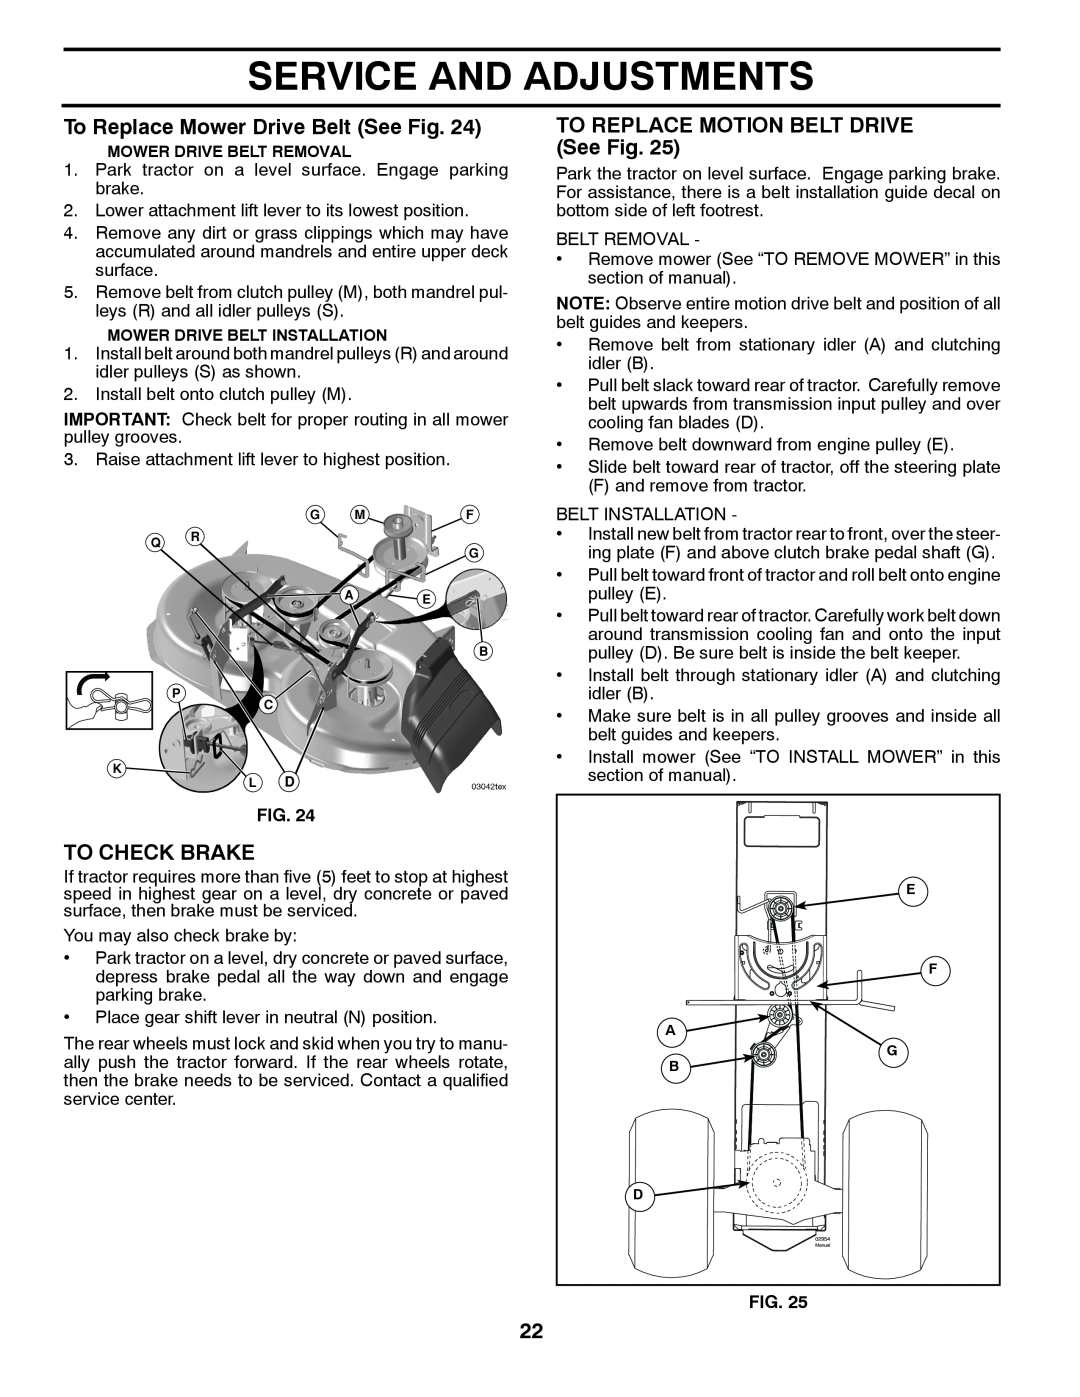 Poulan 96042002400 owner manual To Replace Mower Drive Belt See Fig, To Check Brake, TO REPLACE MOTION BELT DRIVE See Fig 